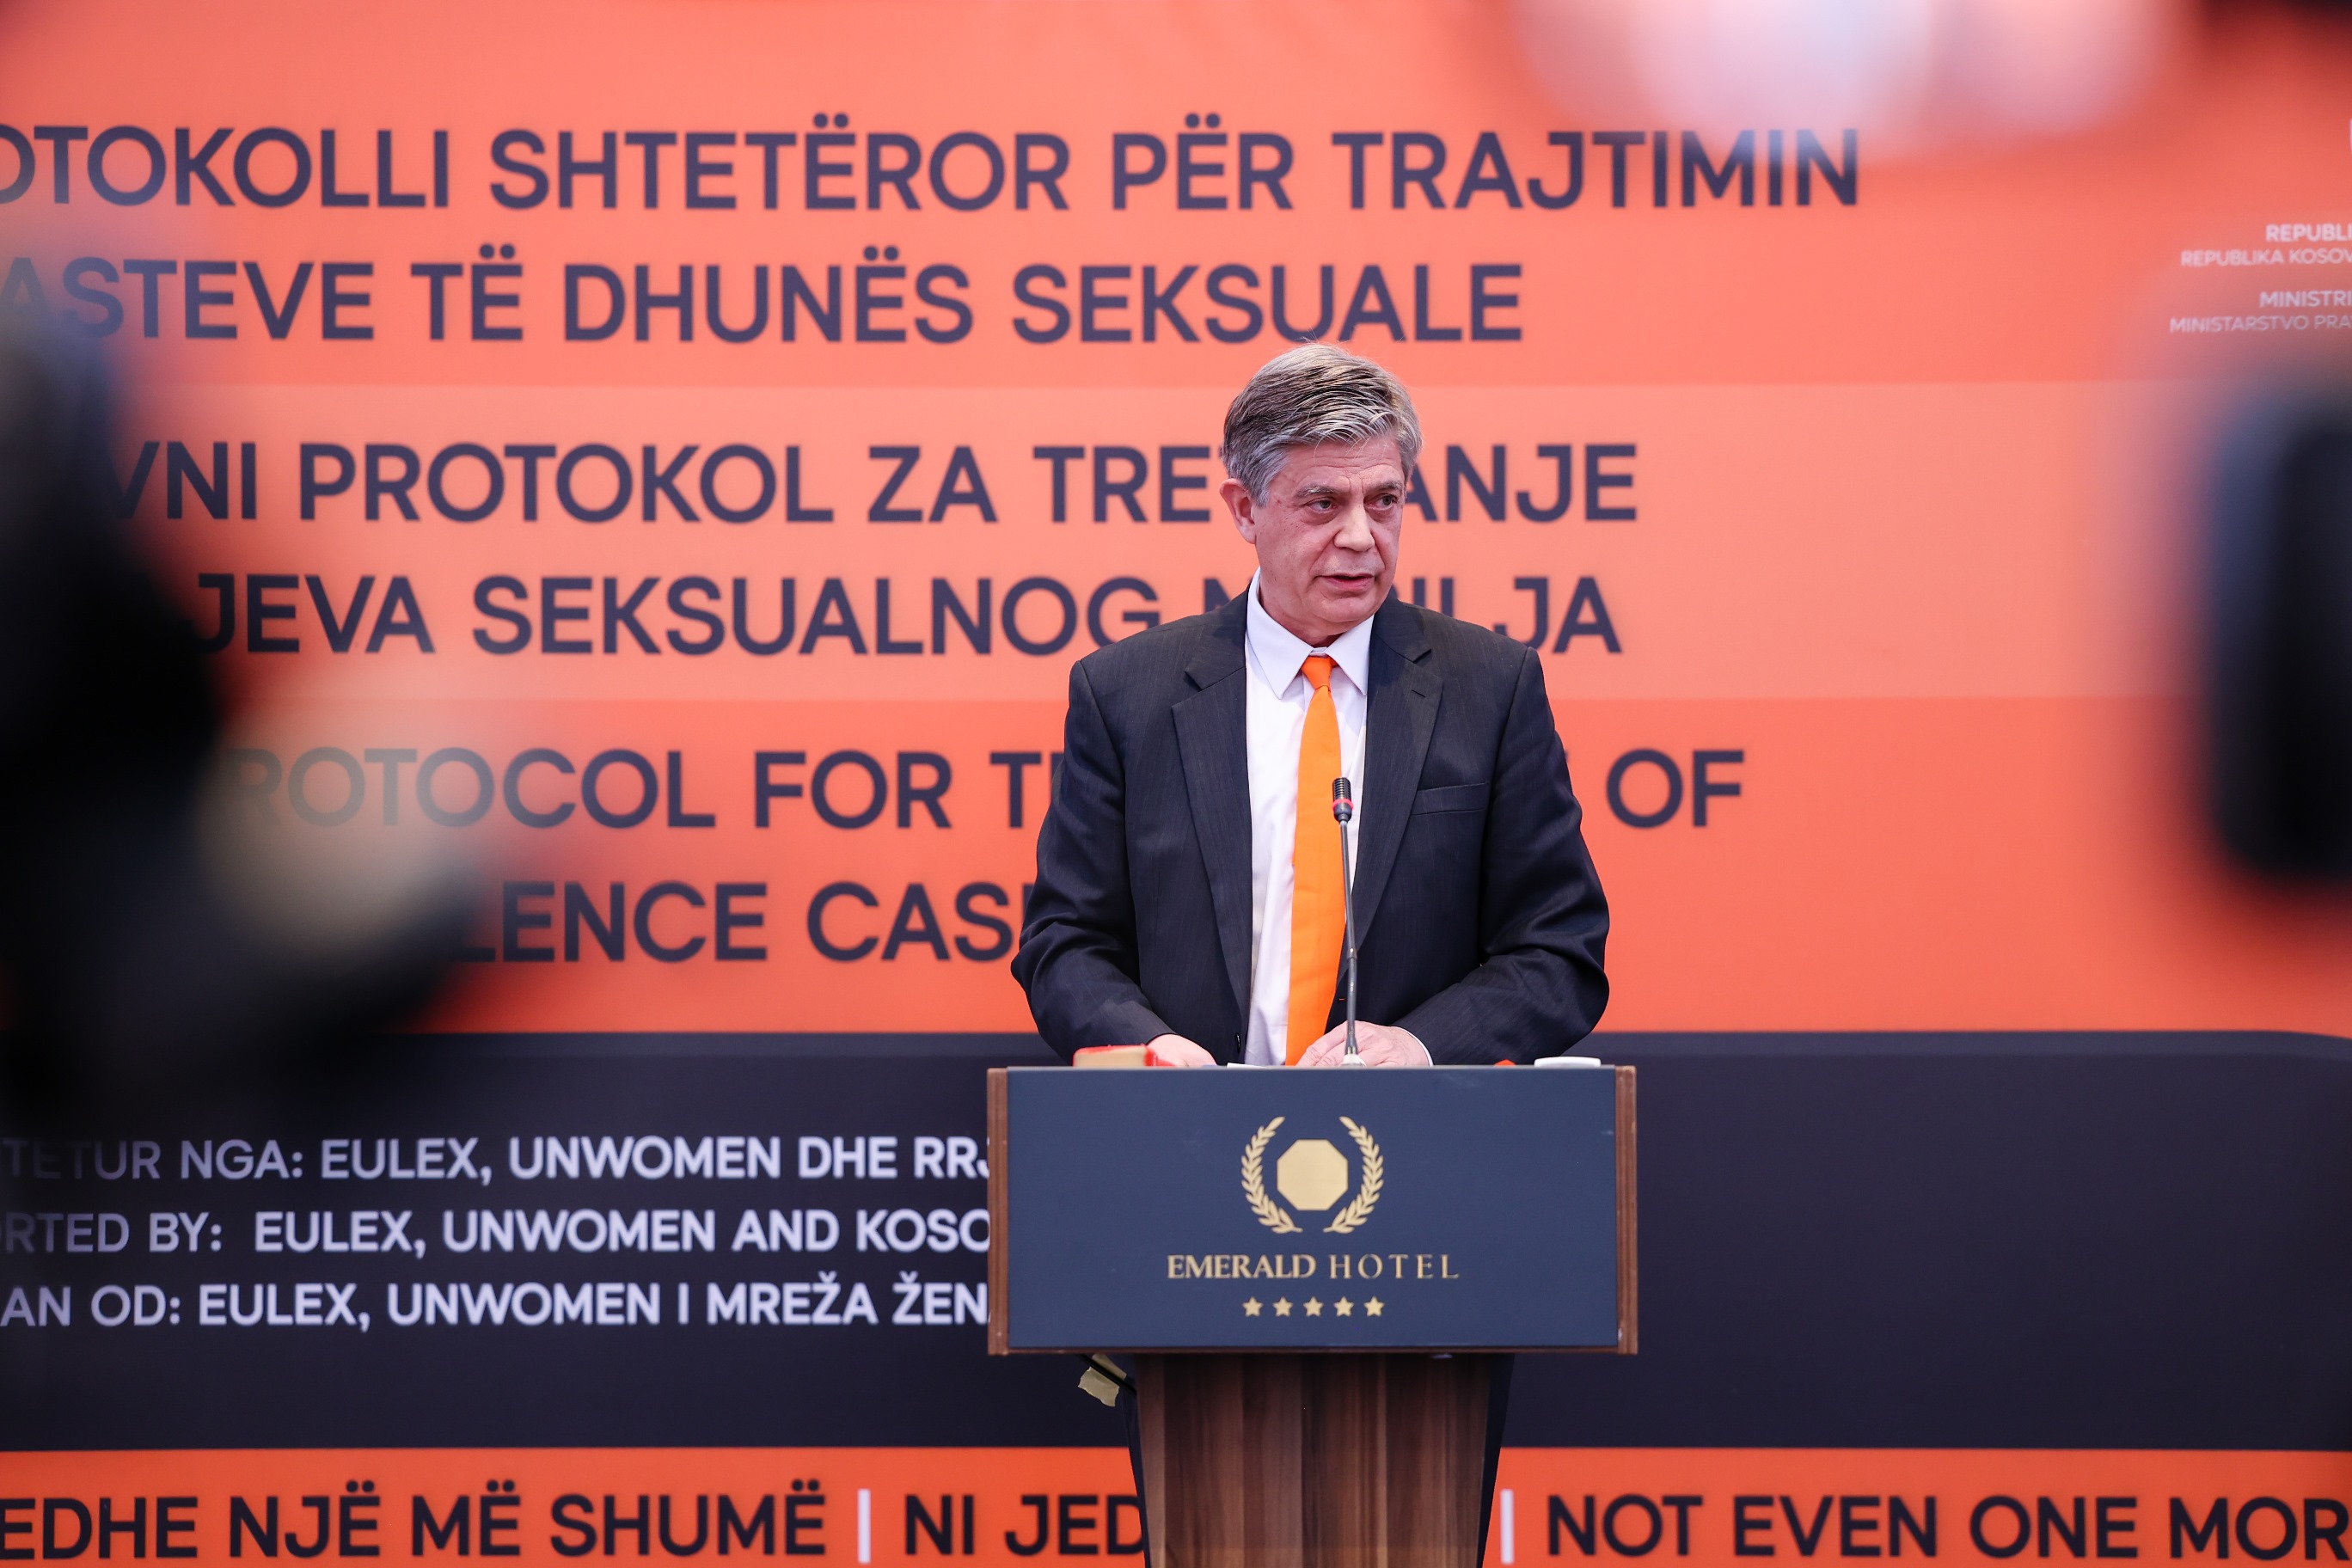 EULEX Supports the Launch of the Protocol for Treatment of Sexual Violence Cases